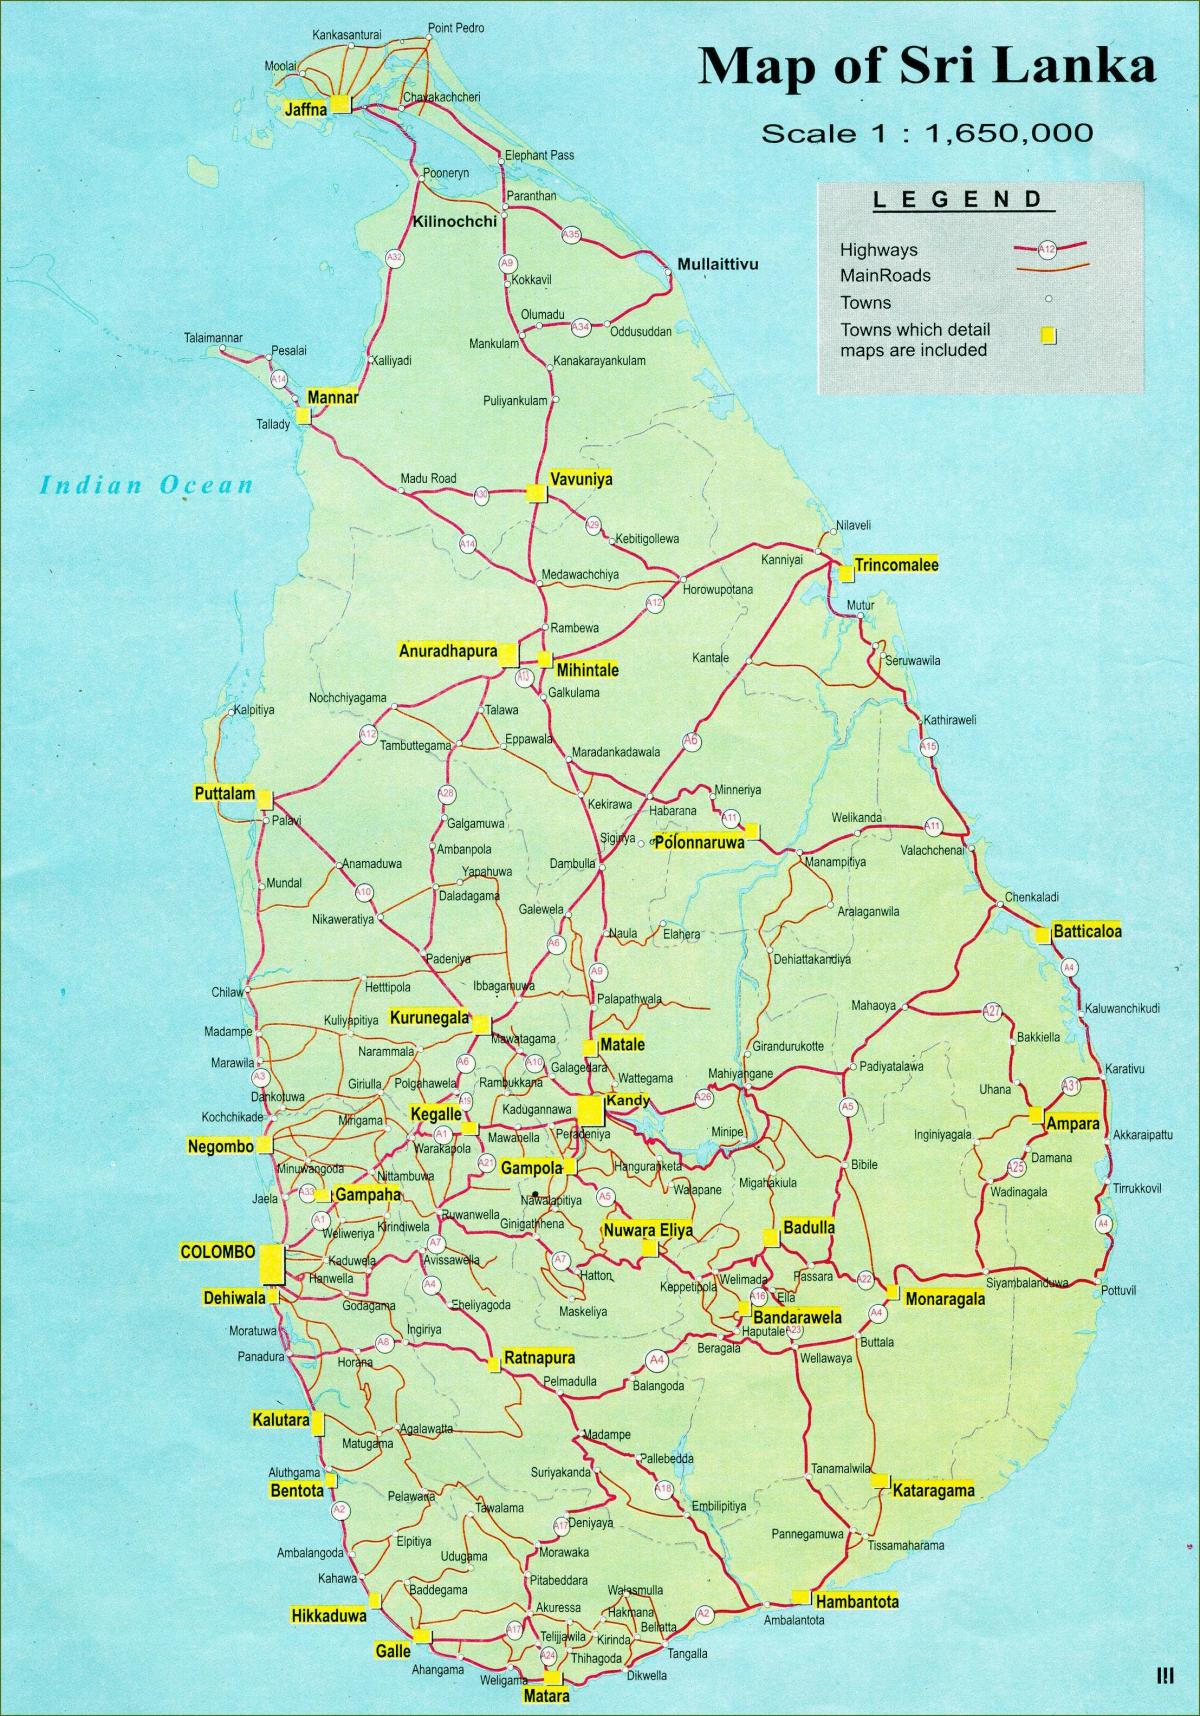 map of Sri Lanka map with distance